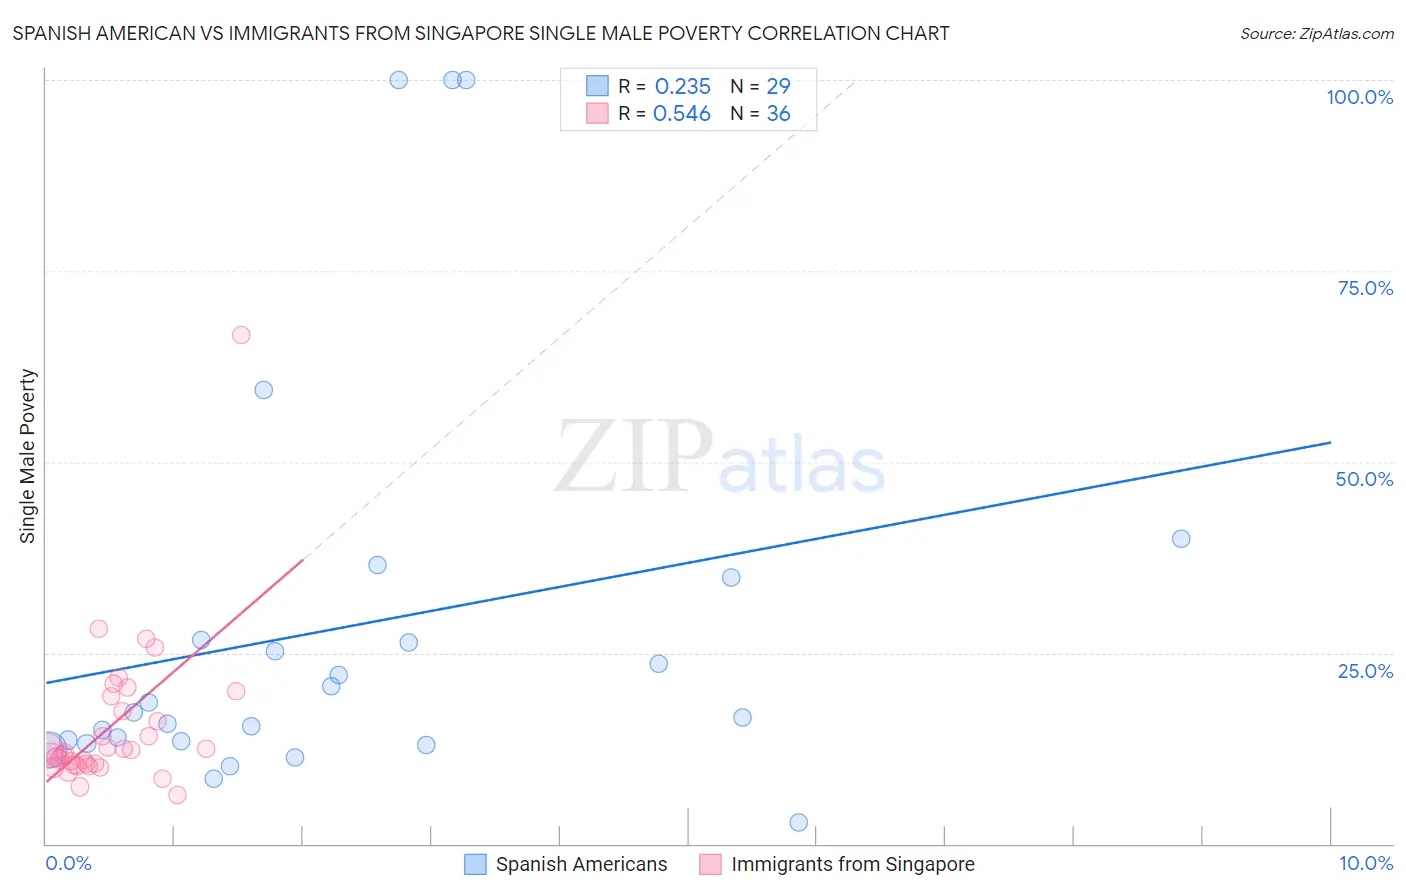 Spanish American vs Immigrants from Singapore Single Male Poverty